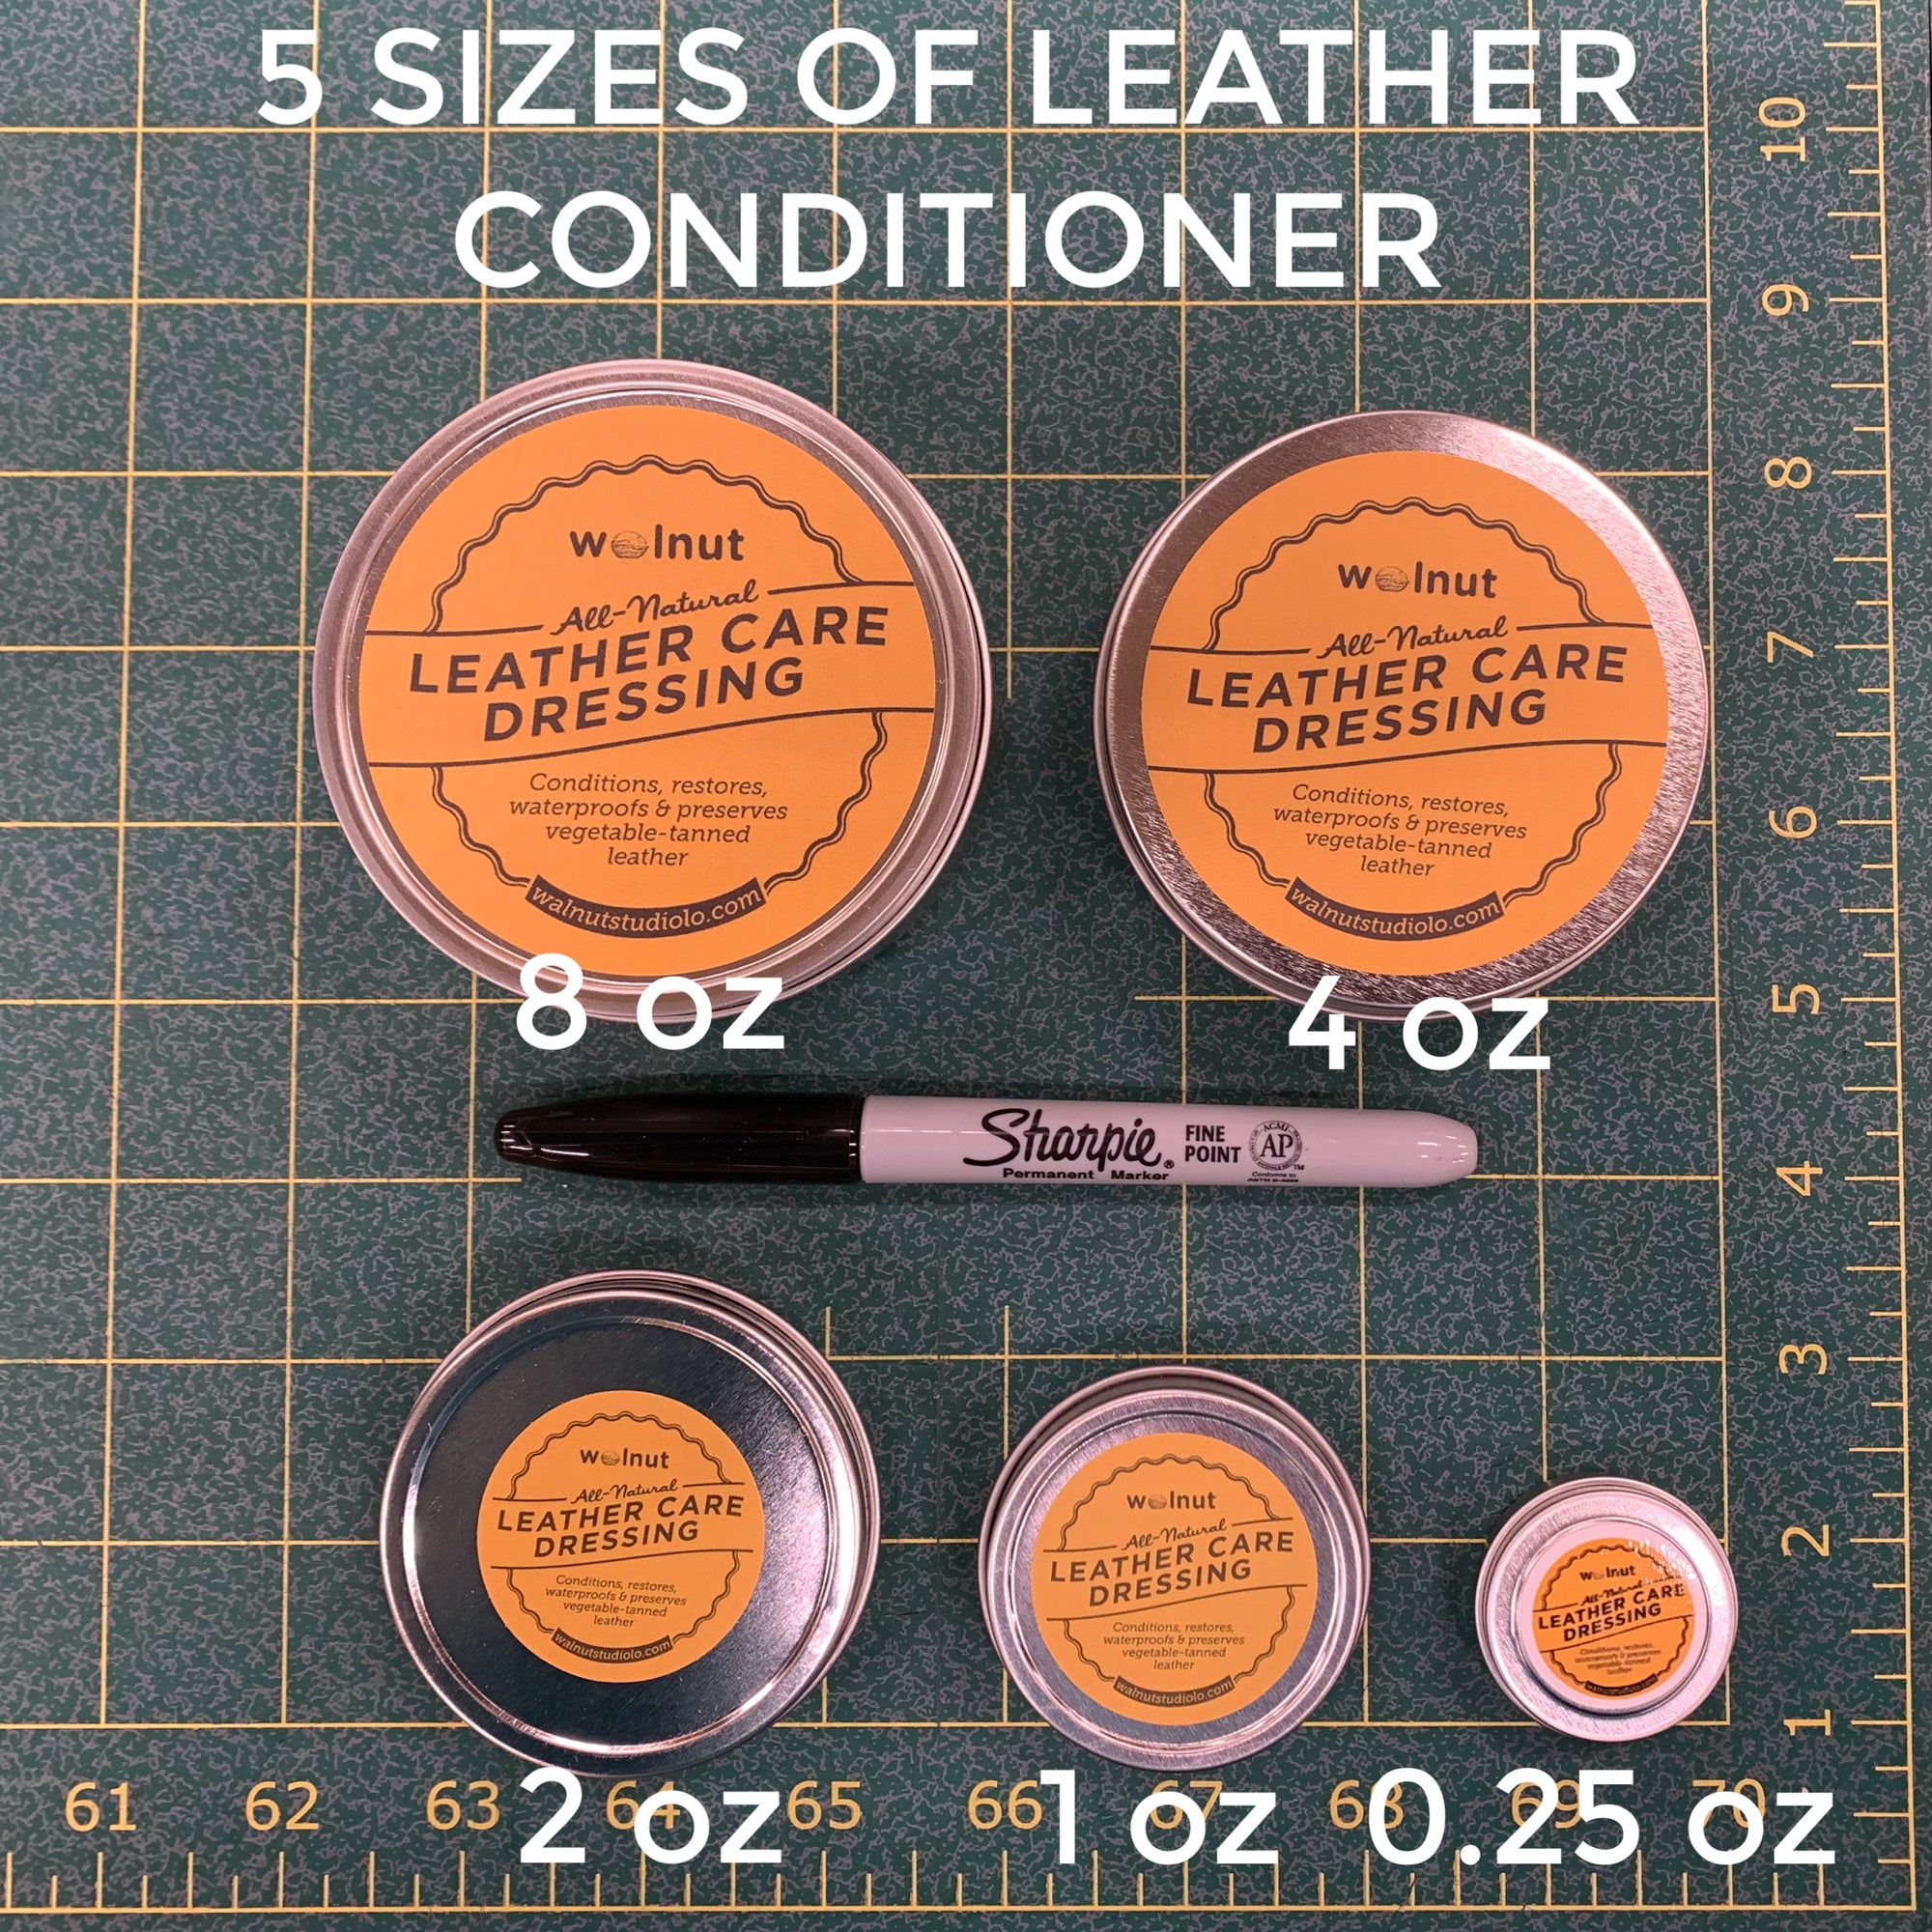 Two New Sizes of Leather Conditioner